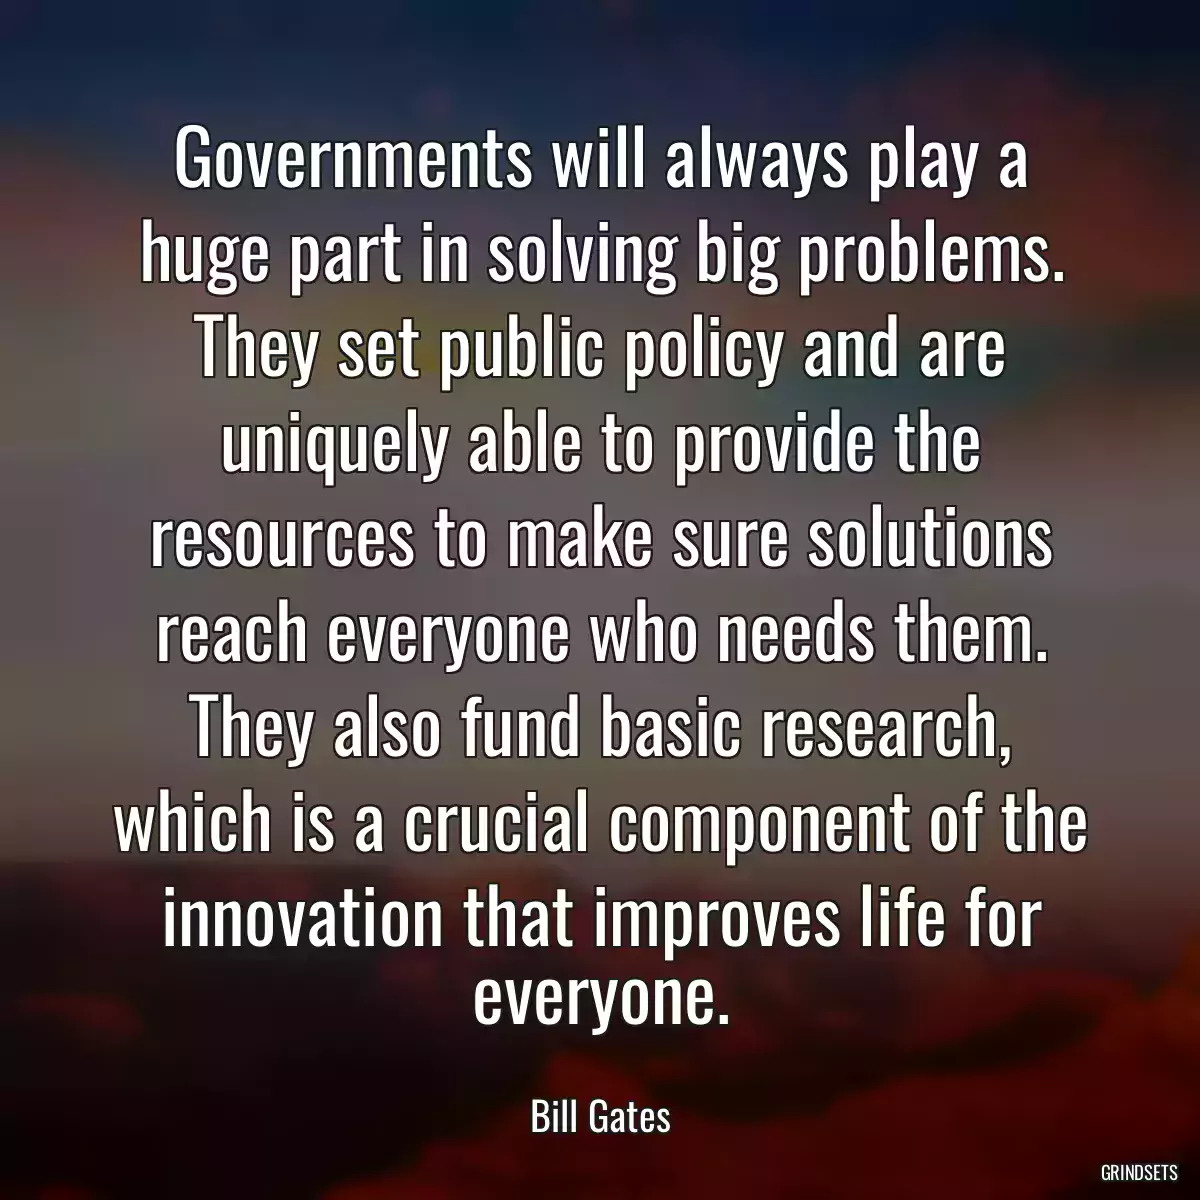 Governments will always play a huge part in solving big problems. They set public policy and are uniquely able to provide the resources to make sure solutions reach everyone who needs them. They also fund basic research, which is a crucial component of the innovation that improves life for everyone.